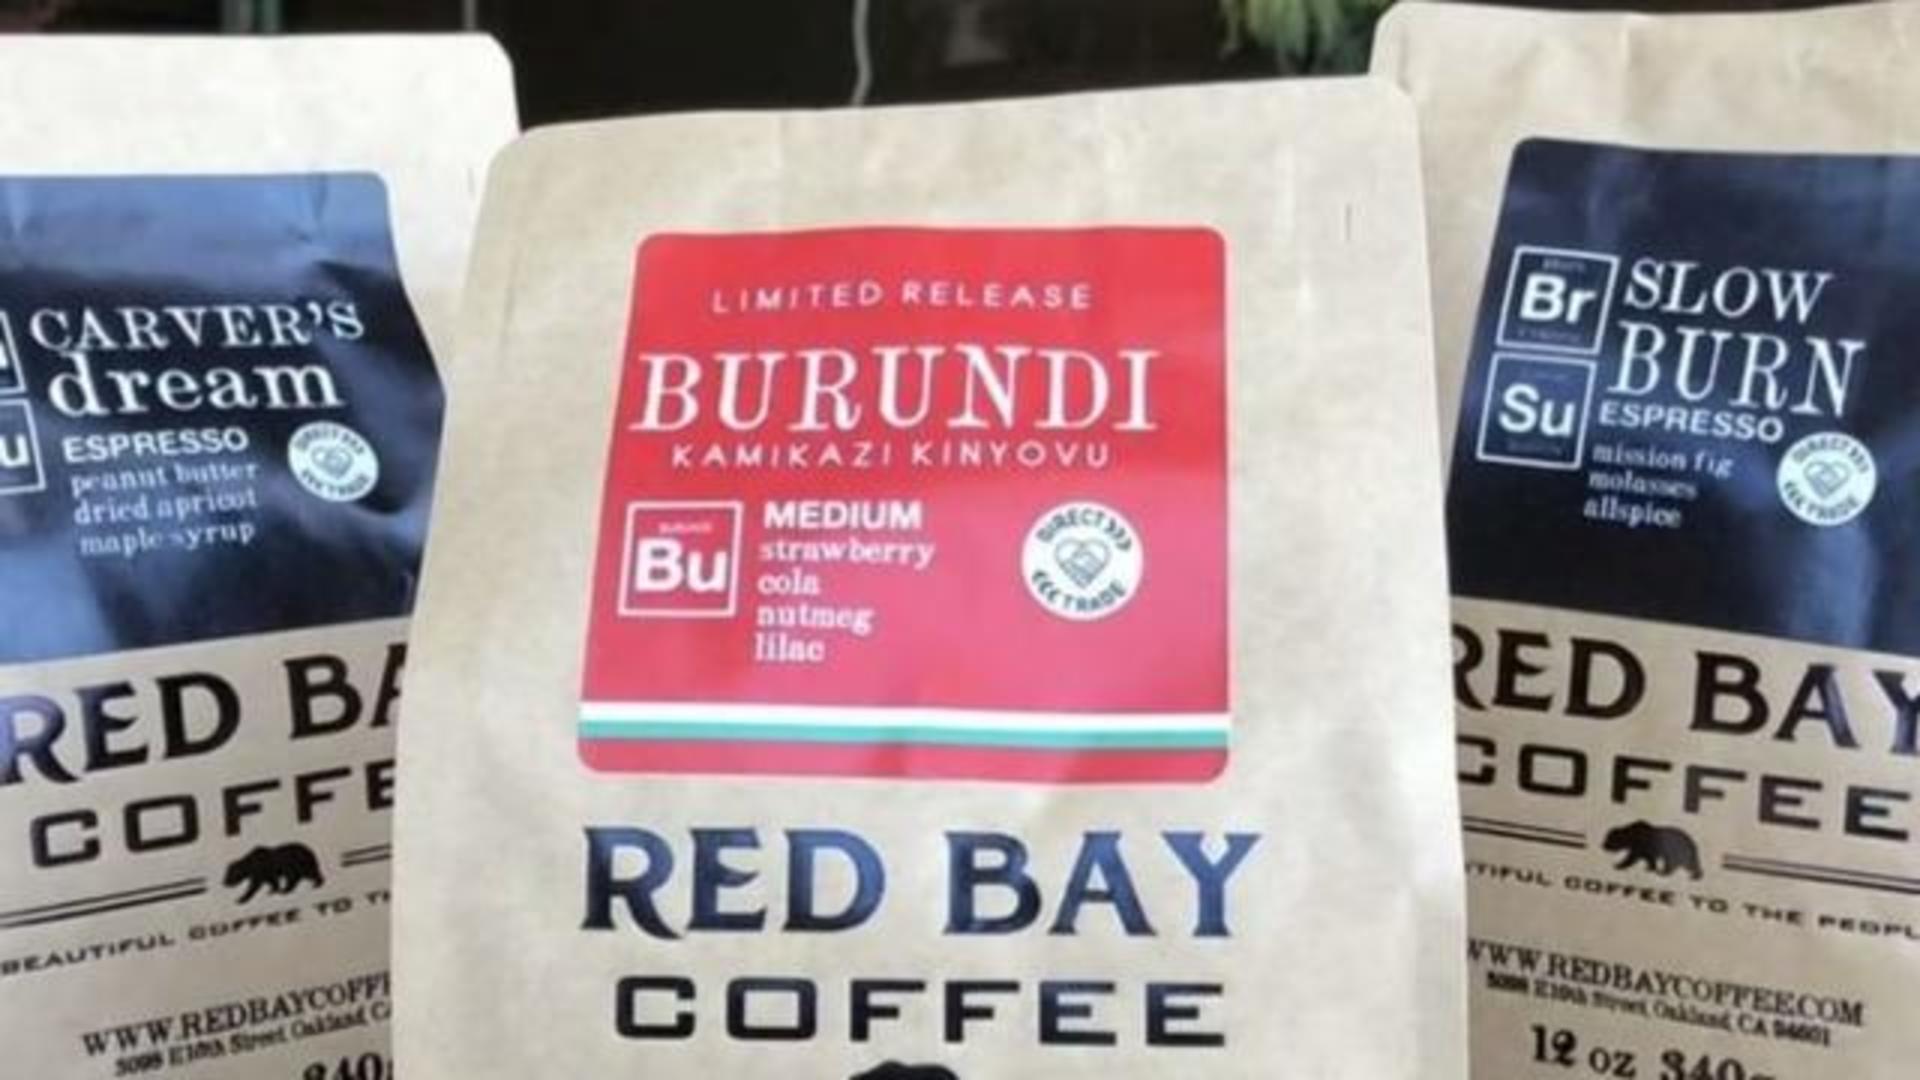 Oakland's Red Bay Coffee champions diversity and fourth wave of